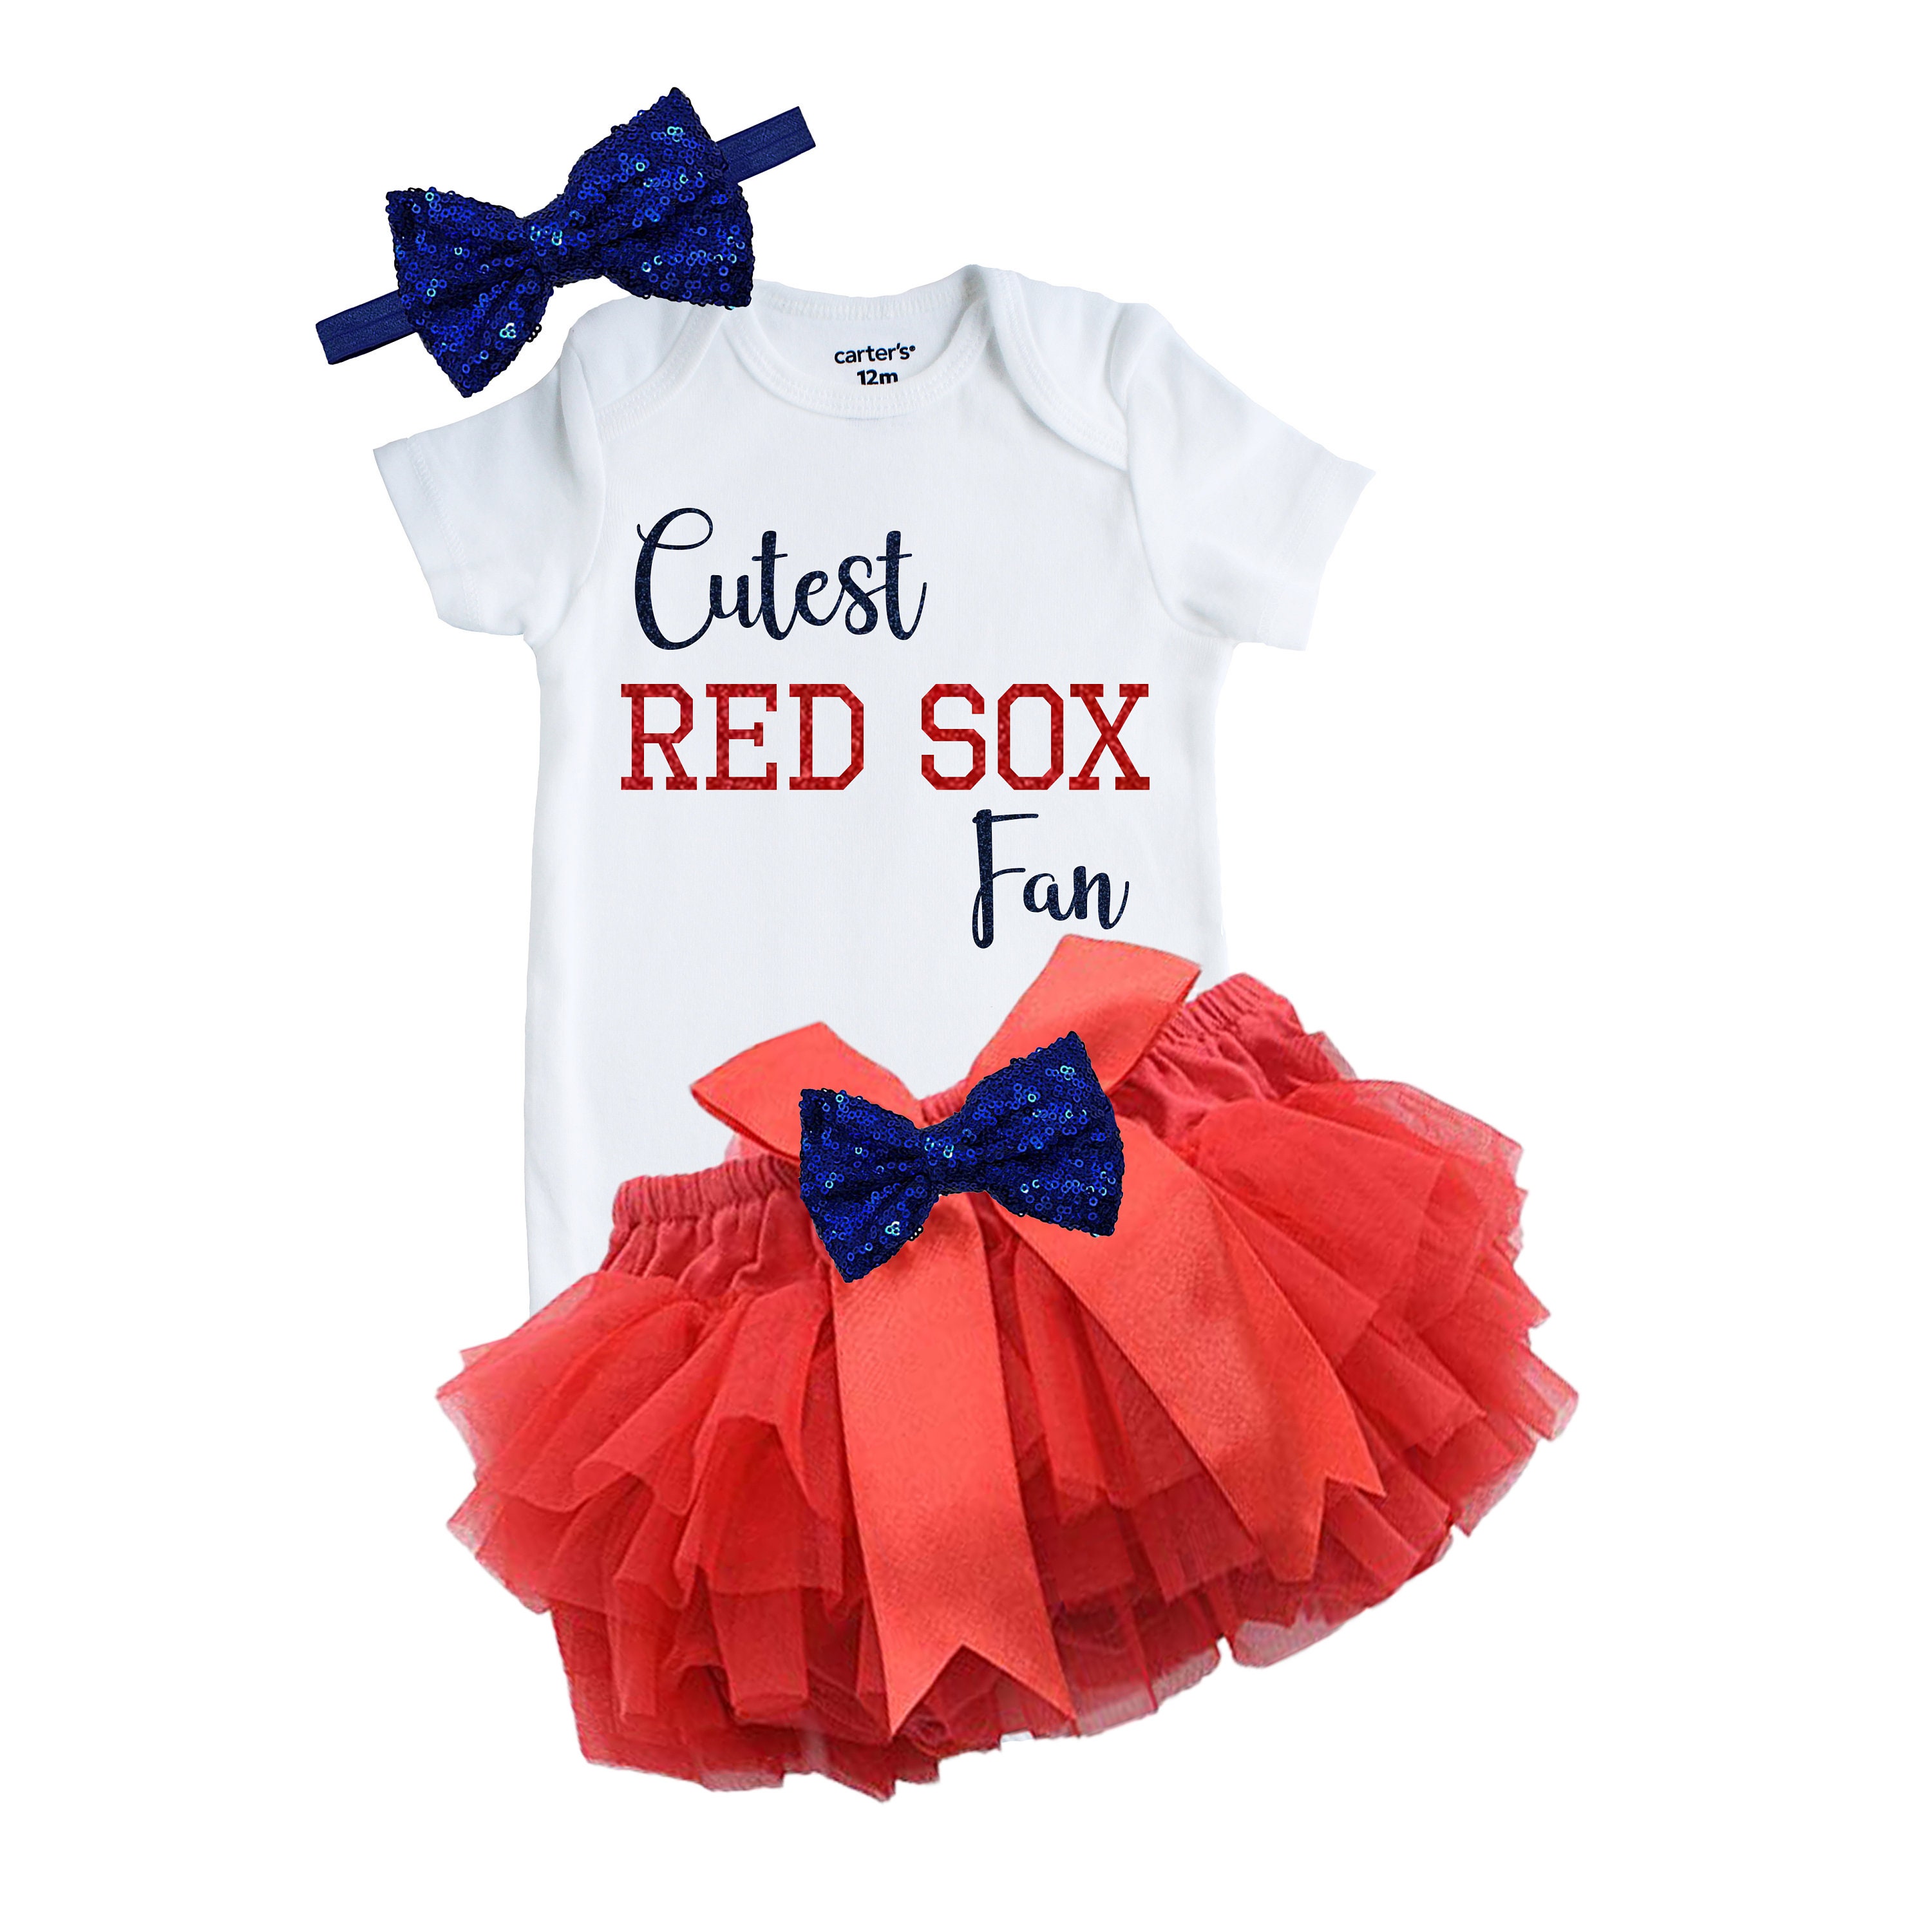 Boston Red Sox Baby Outfit